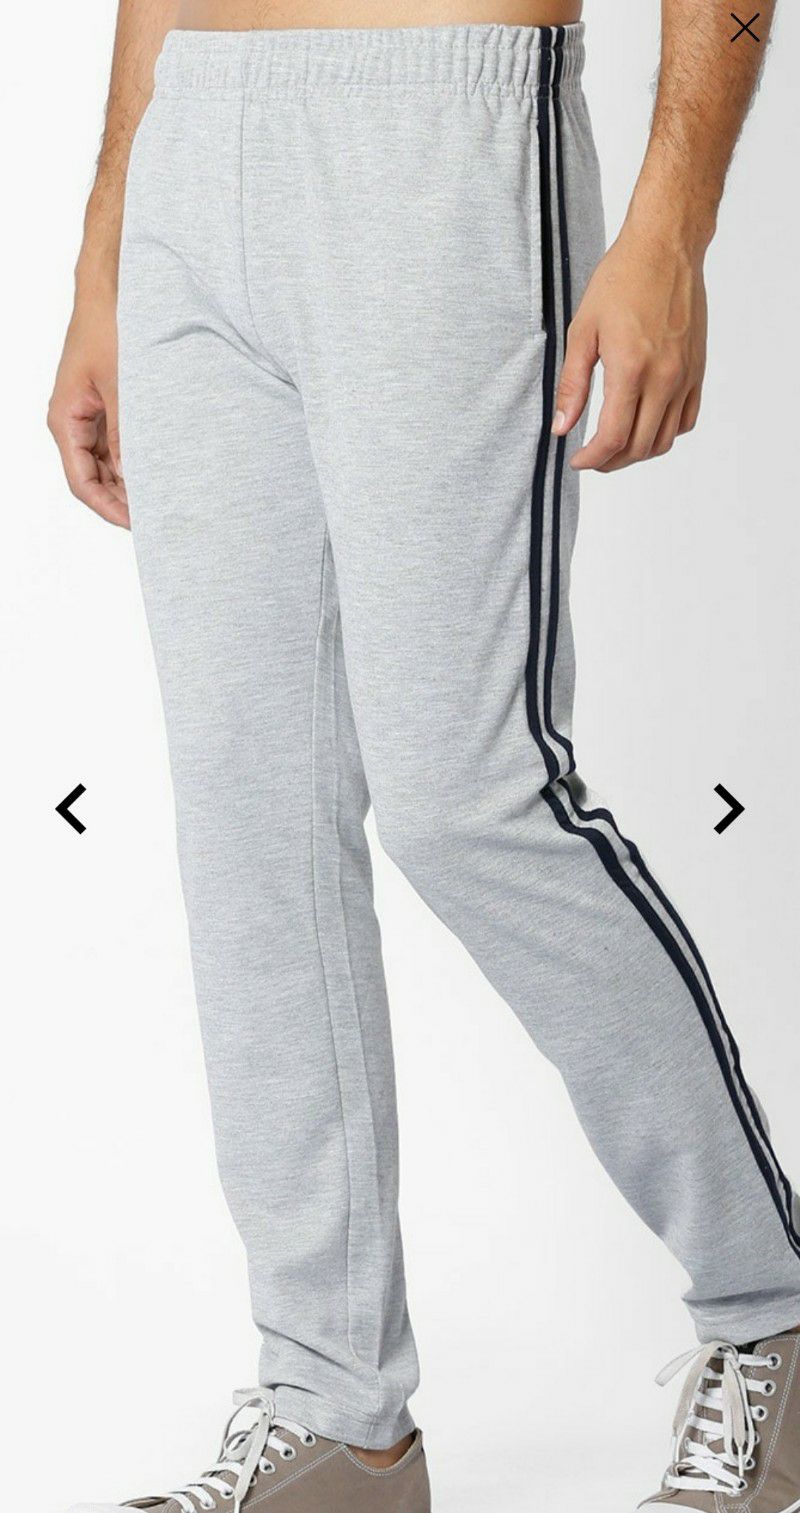 KB TEAM SPIRIT Joggers With Placement Print|BDF Shopping